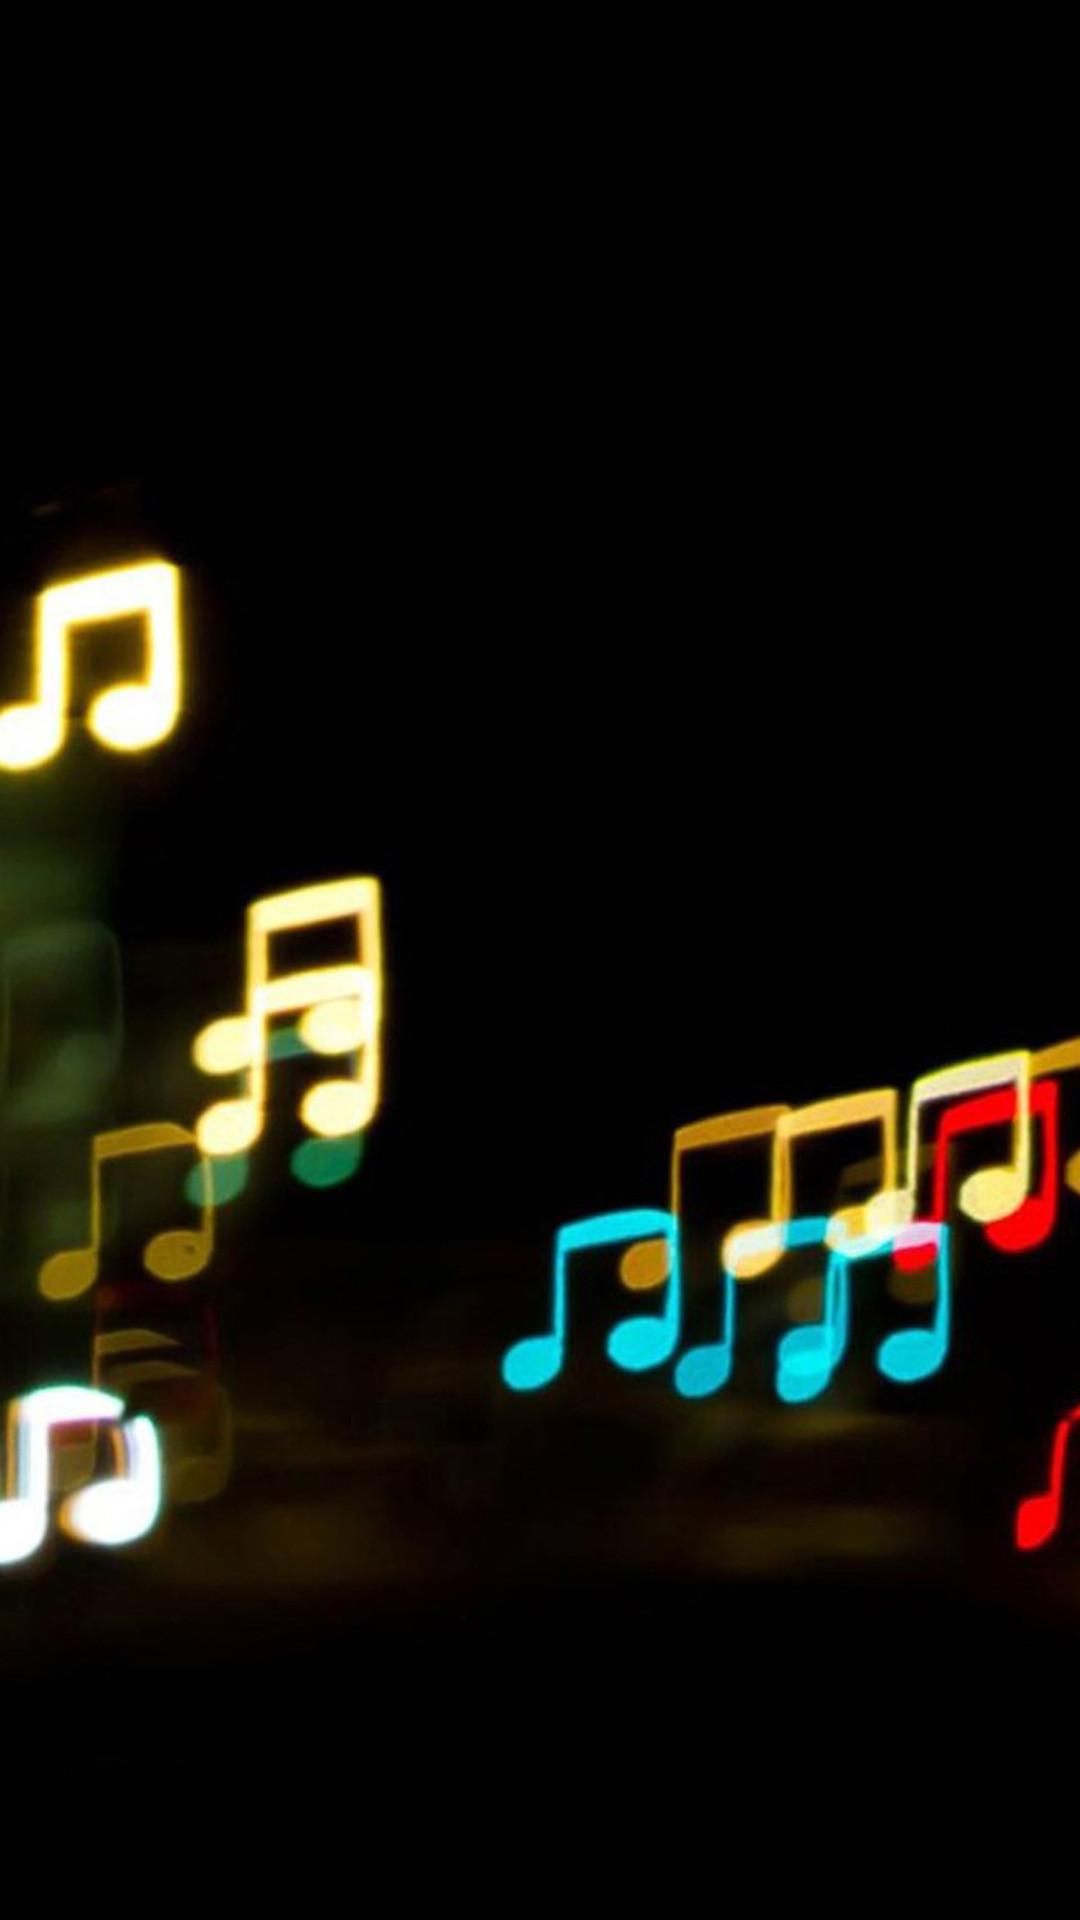 Music Wallpapers and Backgrounds image Free Download